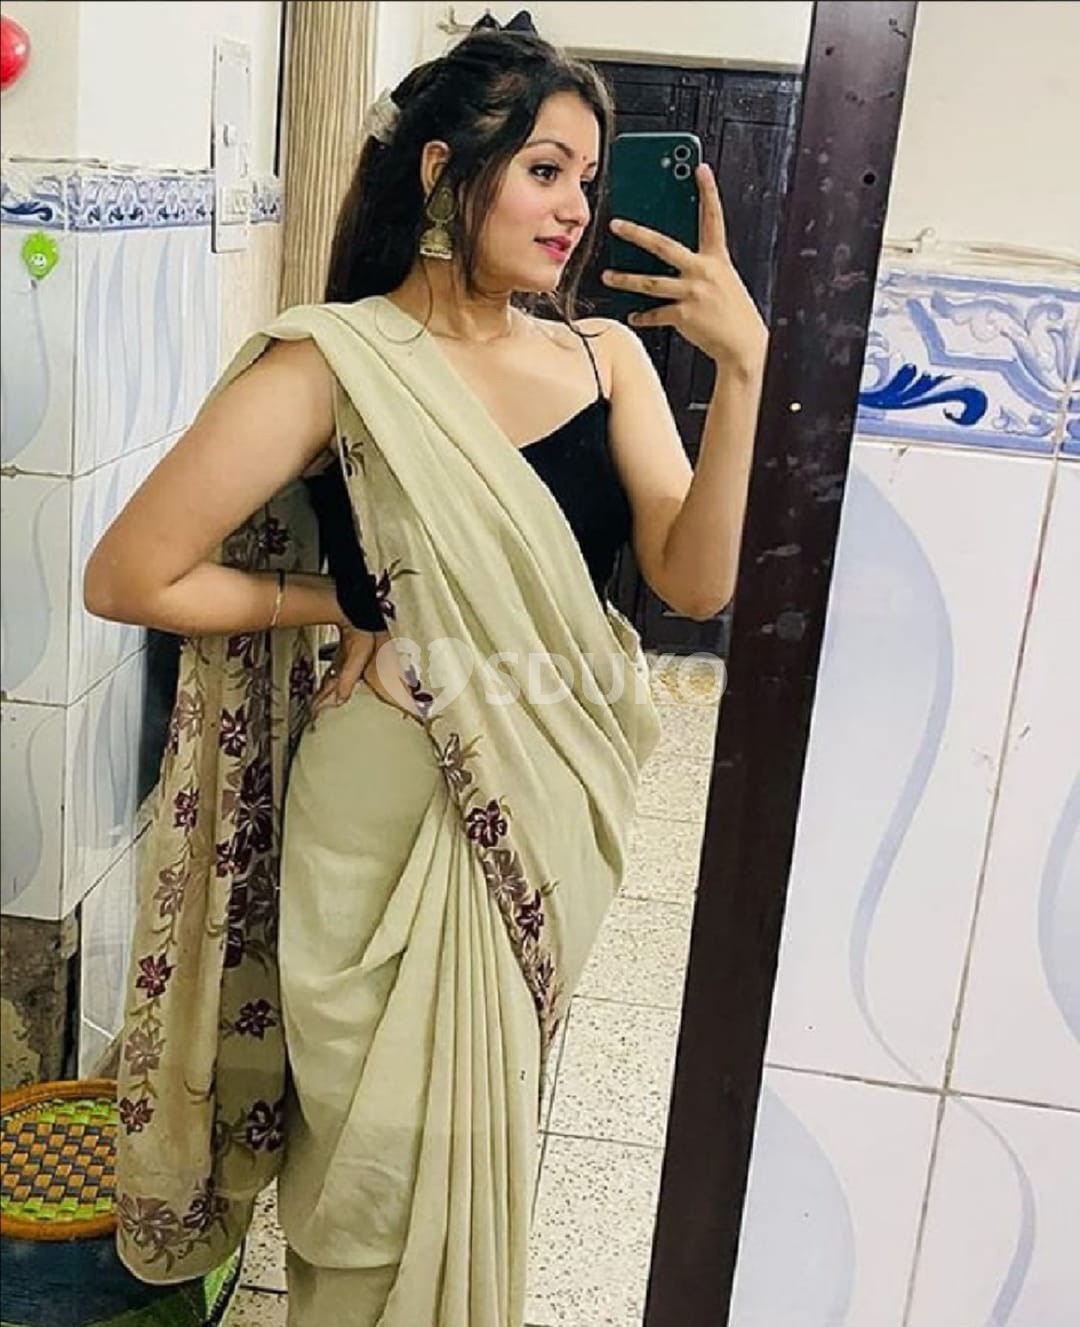 FULL SATISFACTION SERVICE AVAILABLE IN DOMLUR 100% SAFE AND SECURE TODAY LOW PRICE UNLIMITED ENJOY HOT COLLEGE GIRL HOUS